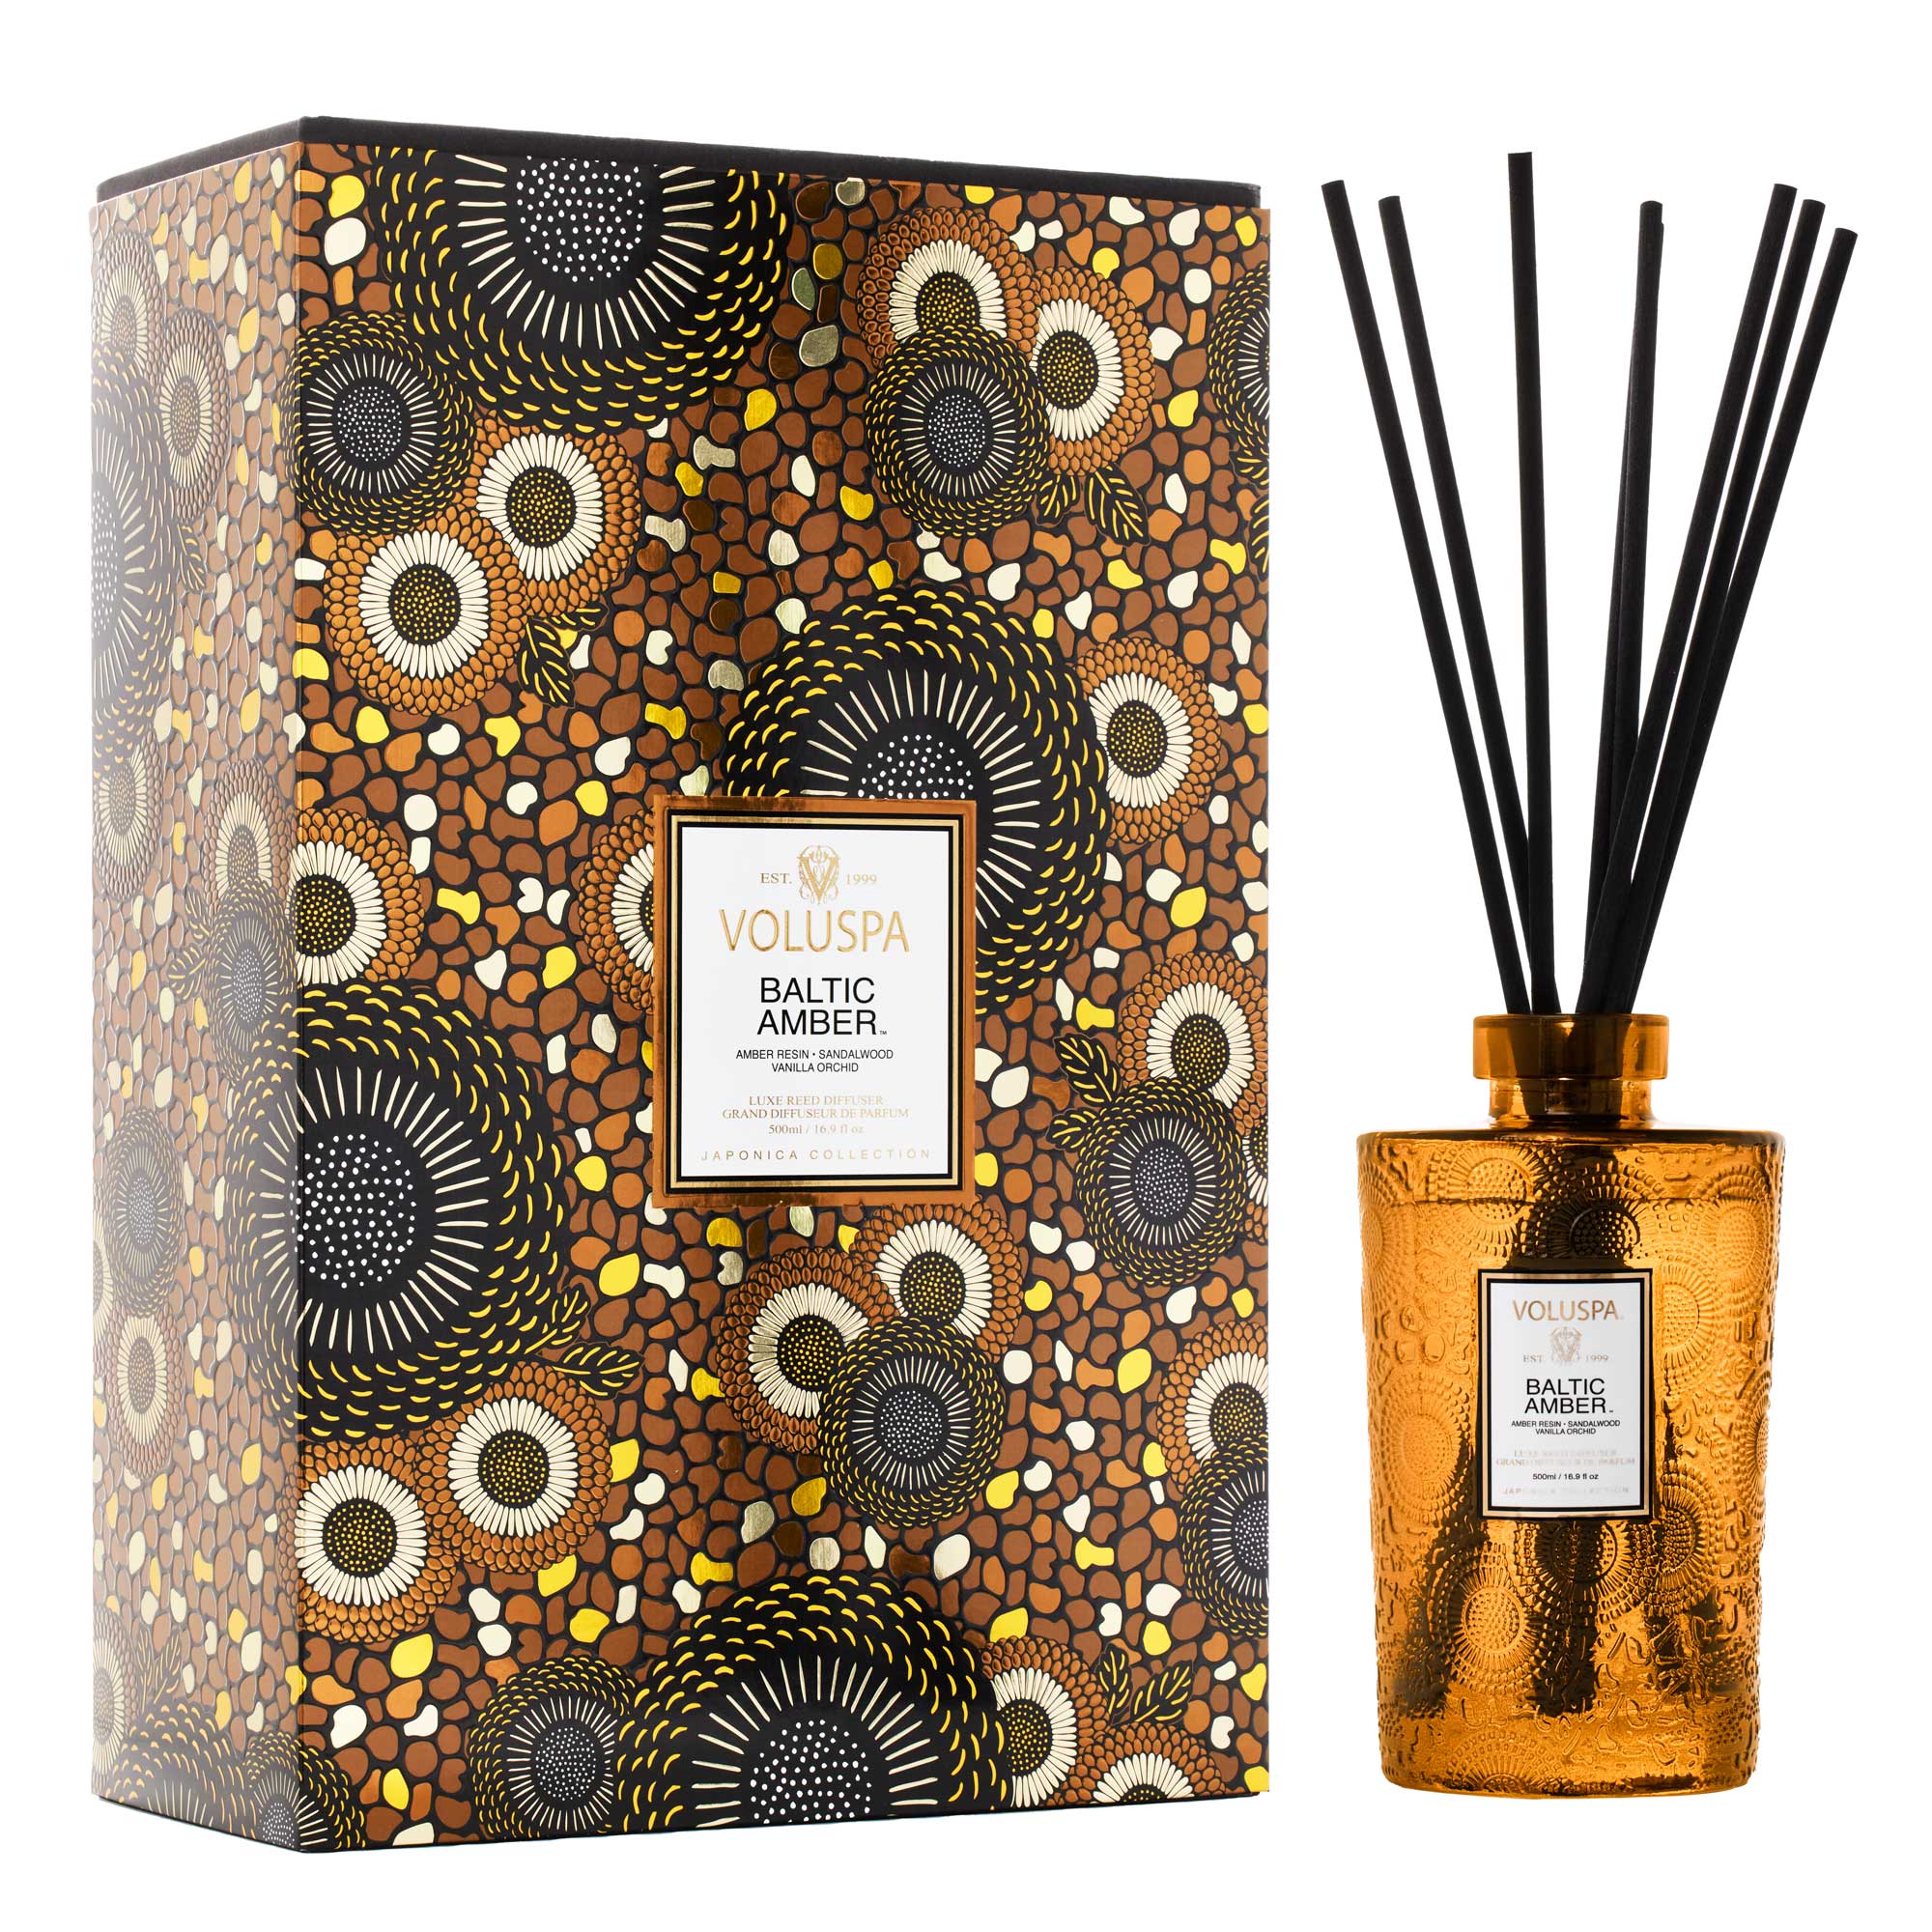 Baltic Amber, Luxe Reed Diffuser